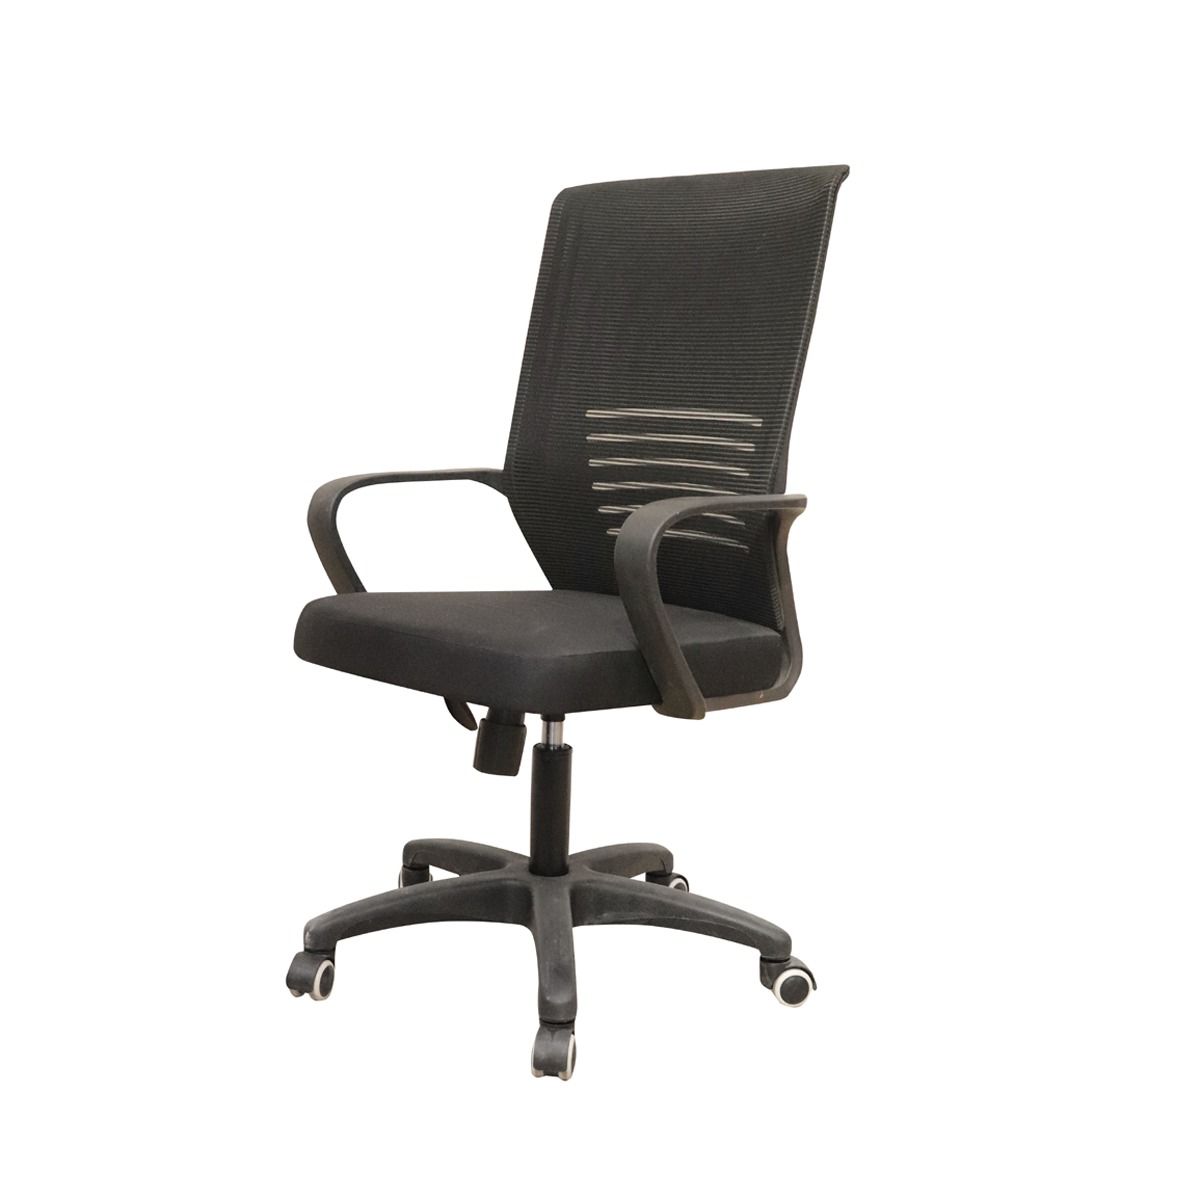 Victory Executive Computer Chairs